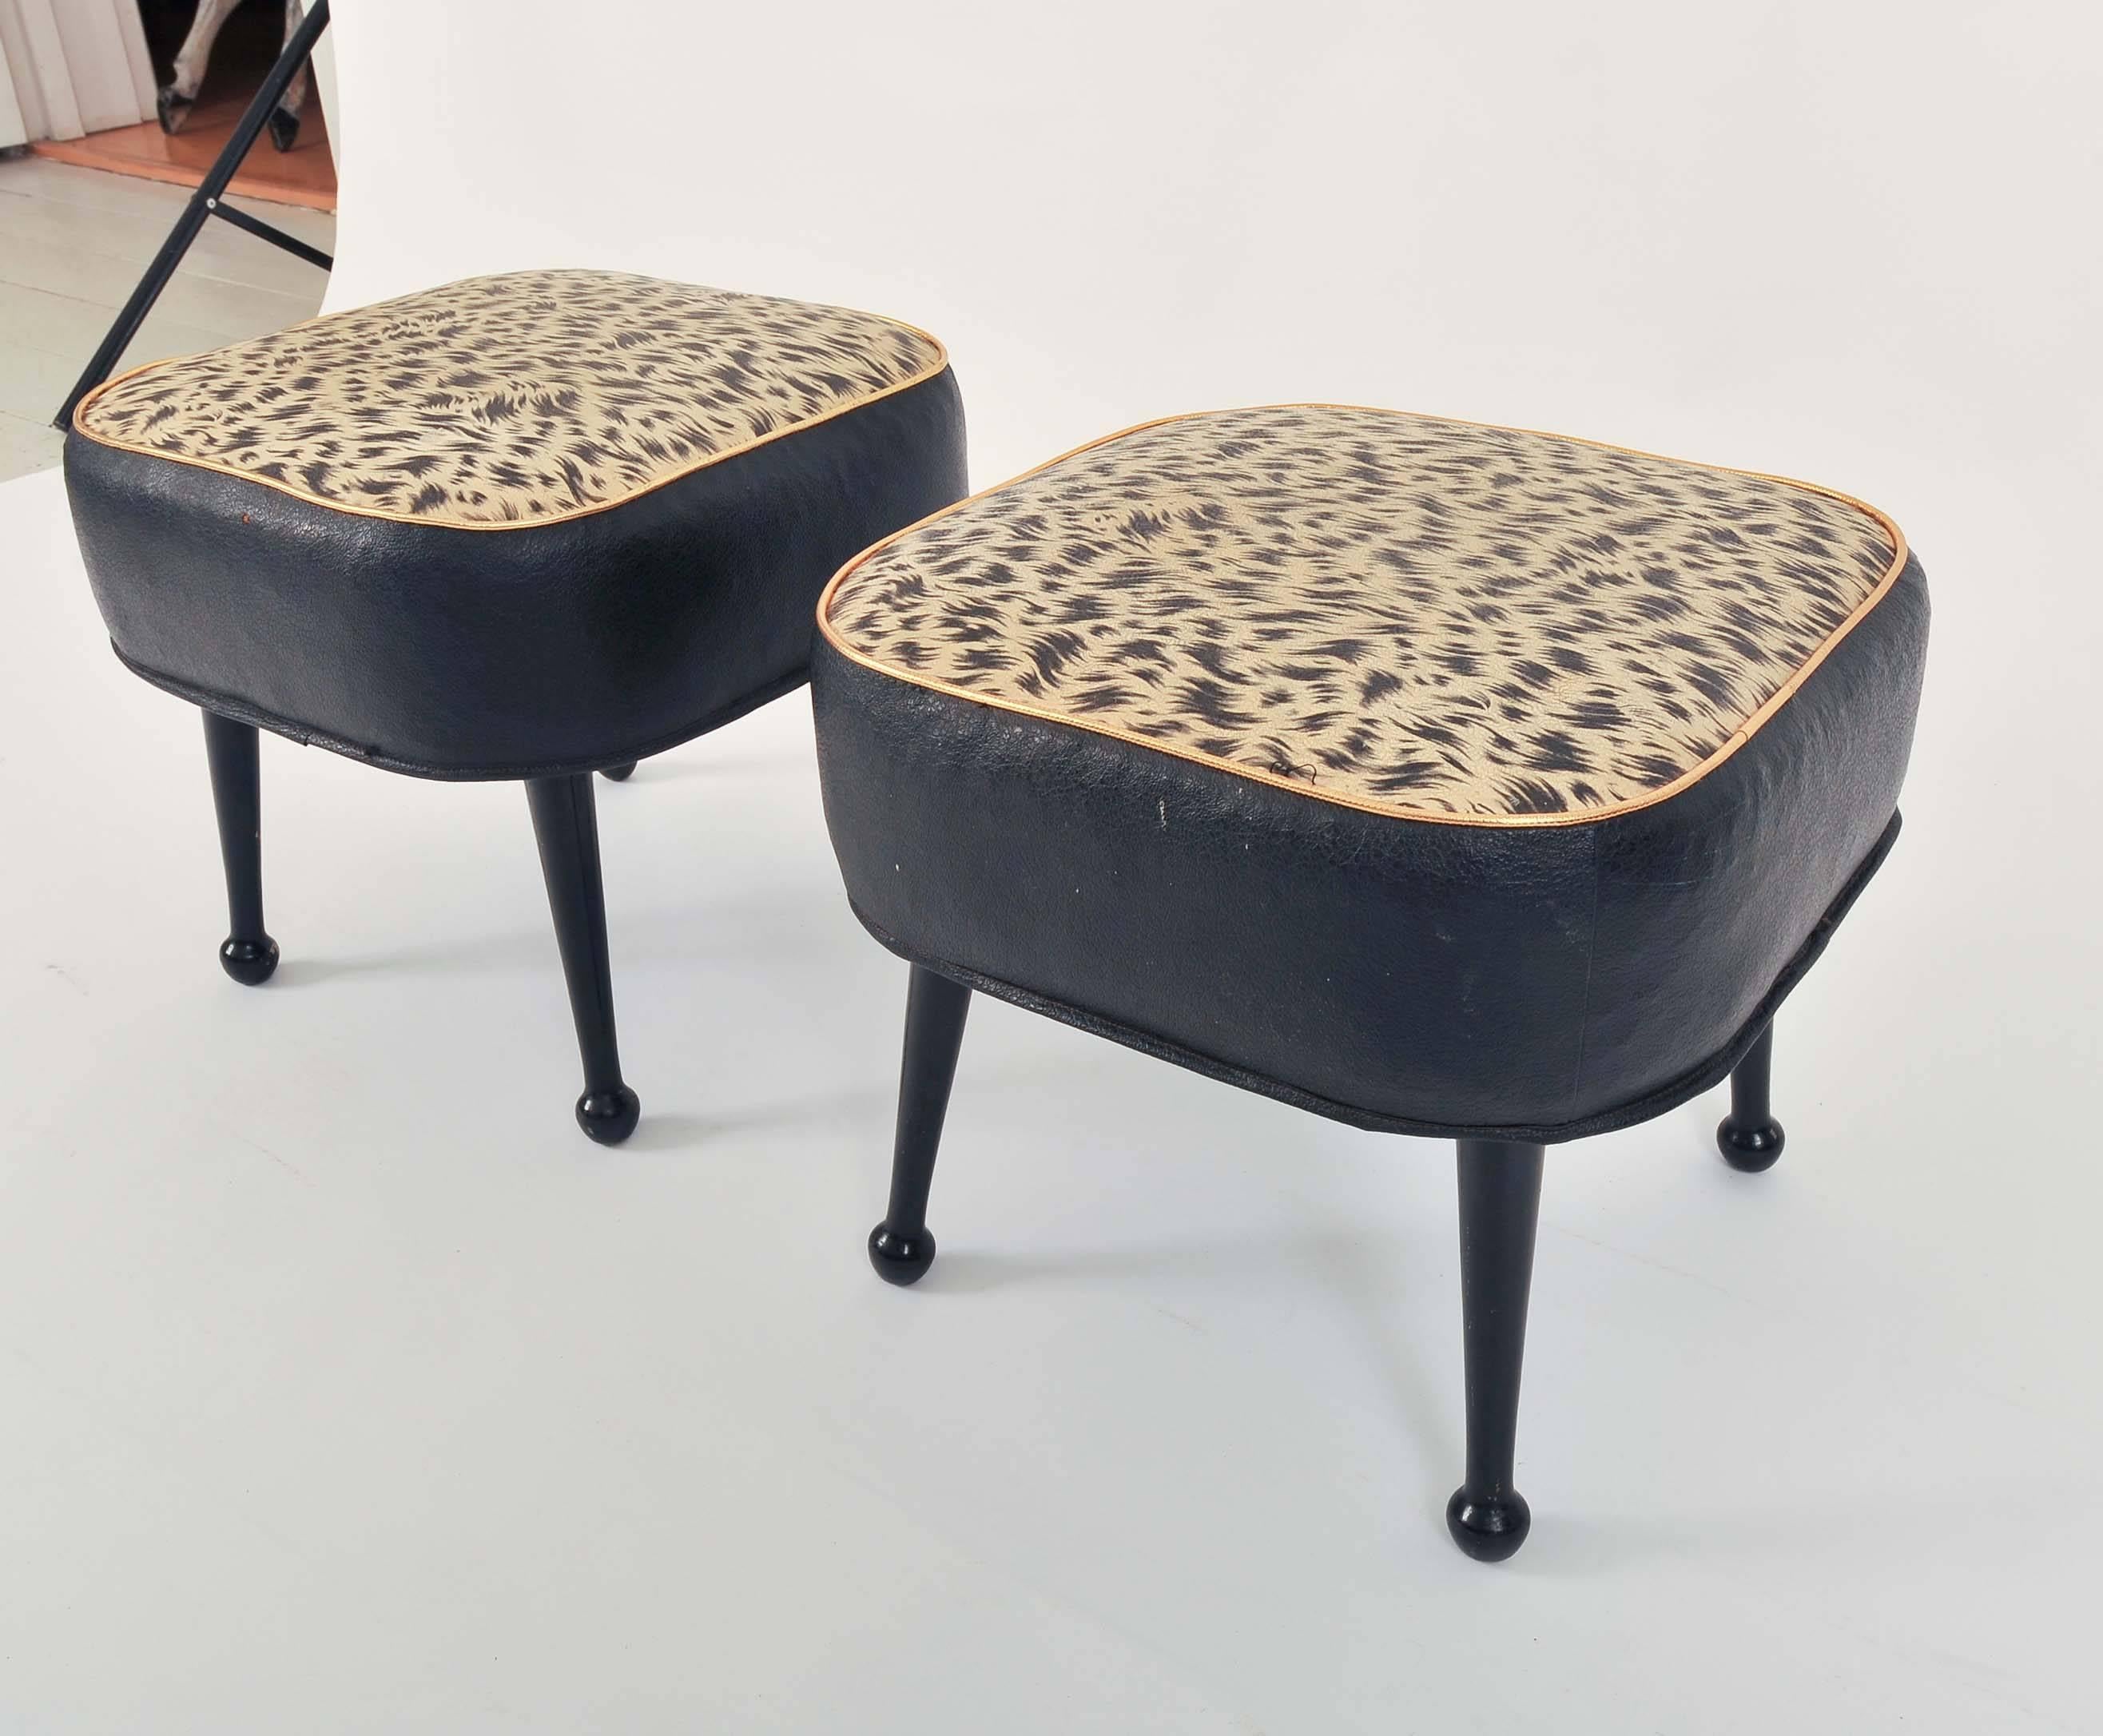 English Pair of 1950s Footstools with Original Vinyl Covering